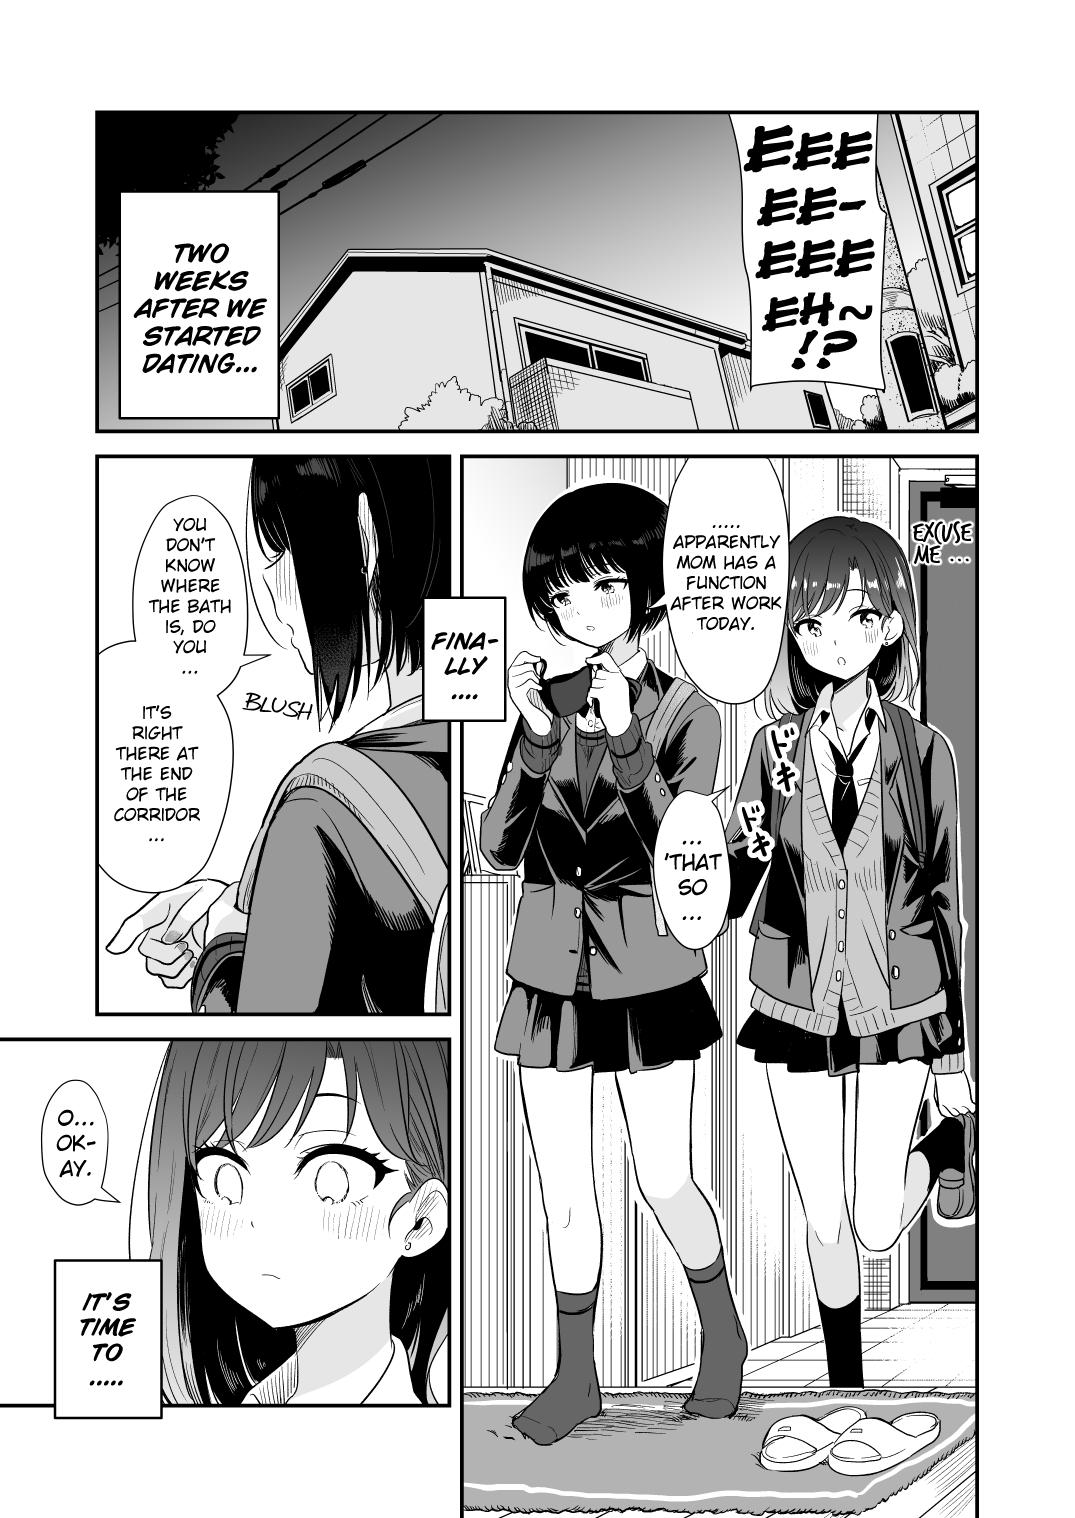 People Having Sex Kyou Oya, Inai kara | My Parents Aren't Home Today, So... Perra - Page 7